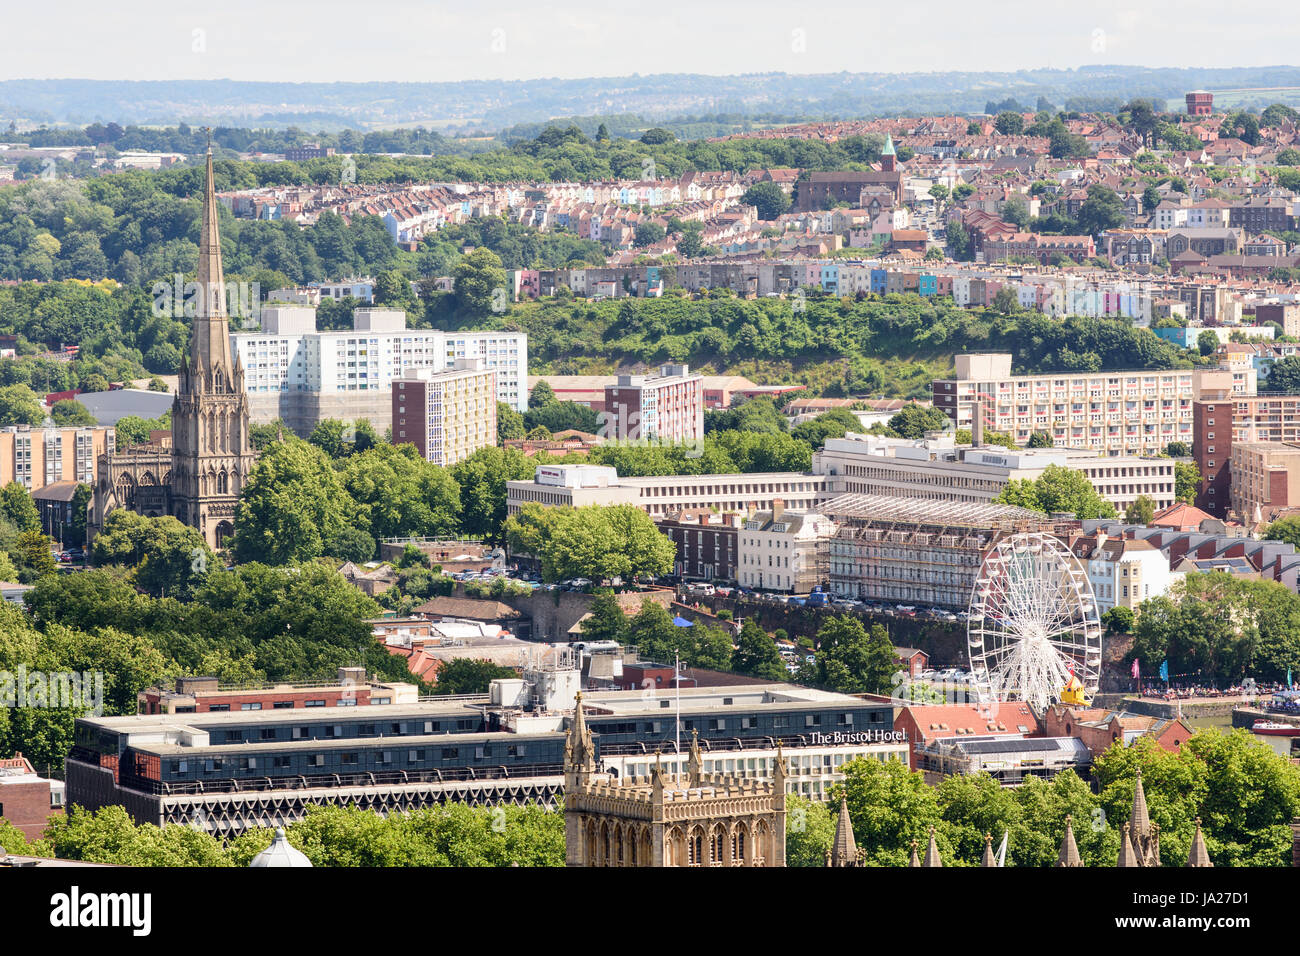 Bristol, England - July 17, 2016: The tall spire of St Mary Redcliffe church and council housing blocks of the Redcliffe Estate stand prominent in the Stock Photo